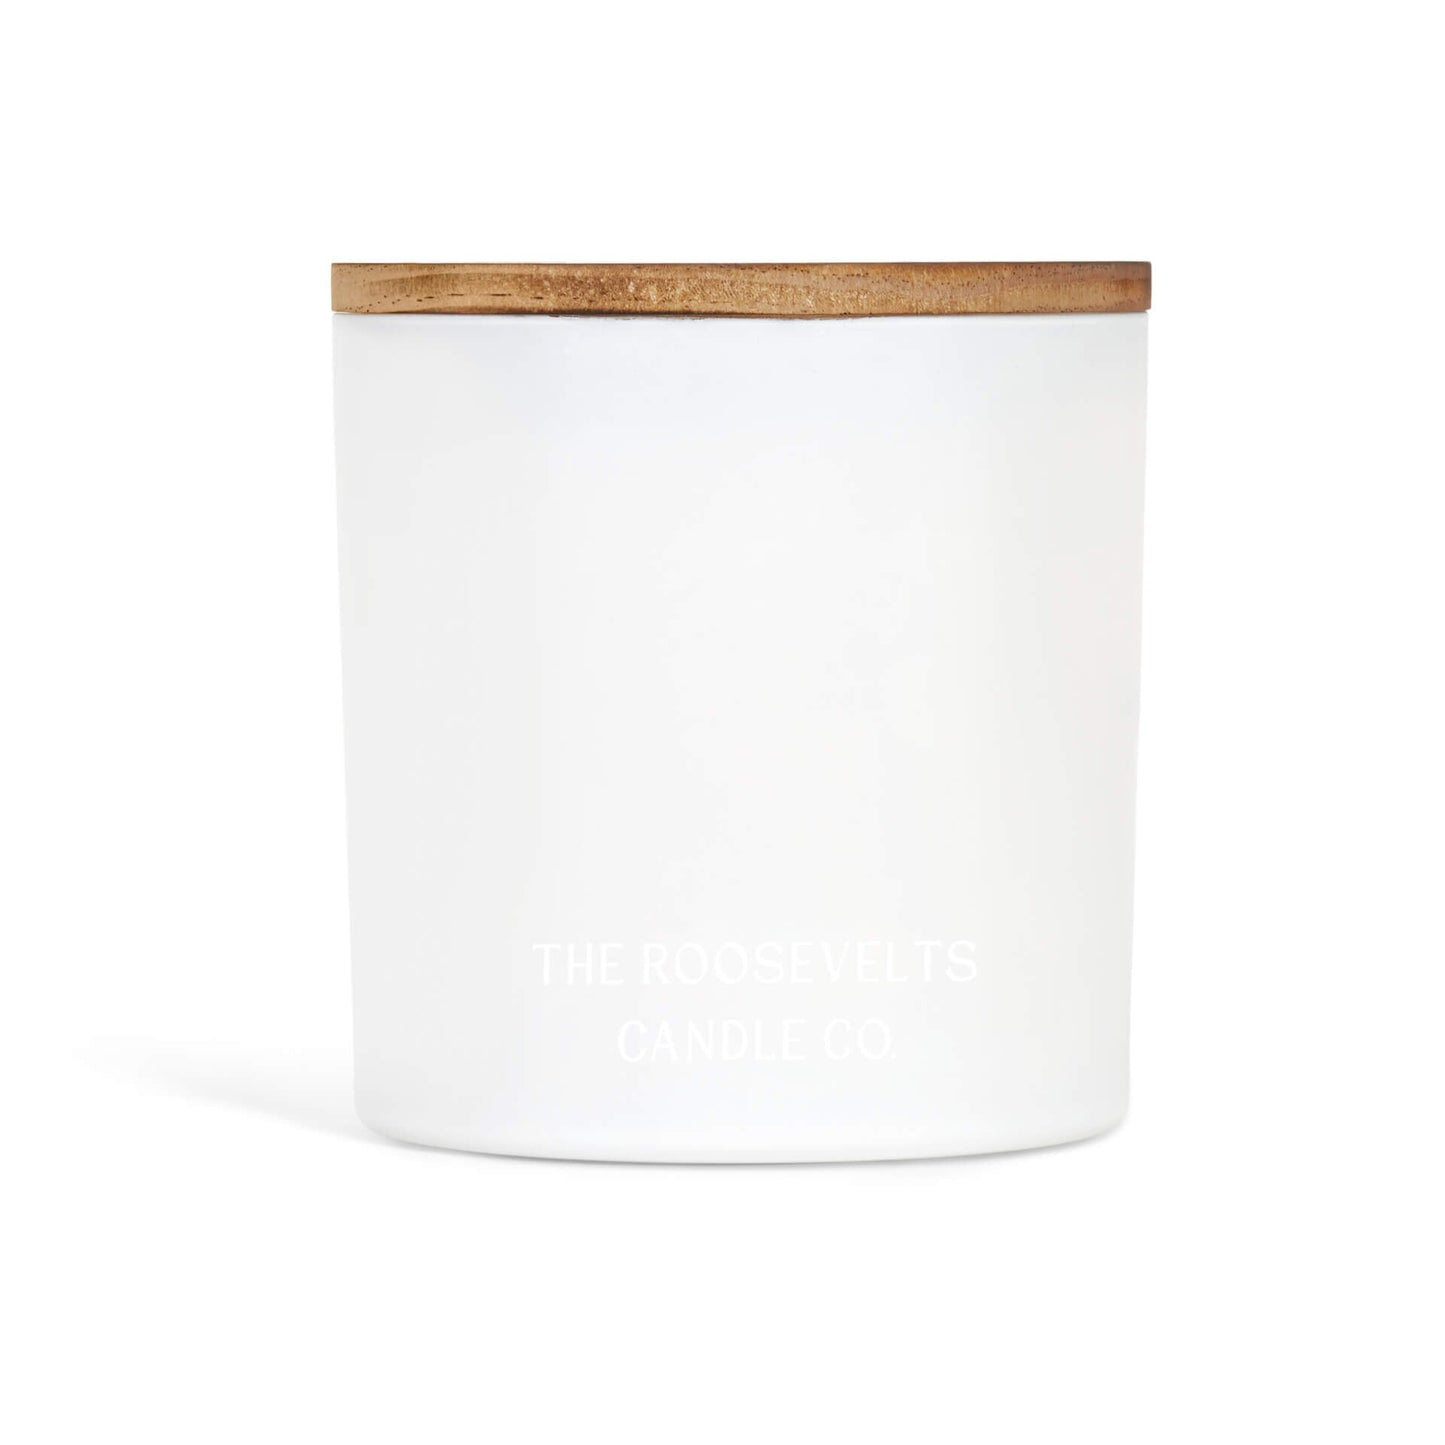 Christmas 3 Wick Candle - The Roosevelts Candle Co.